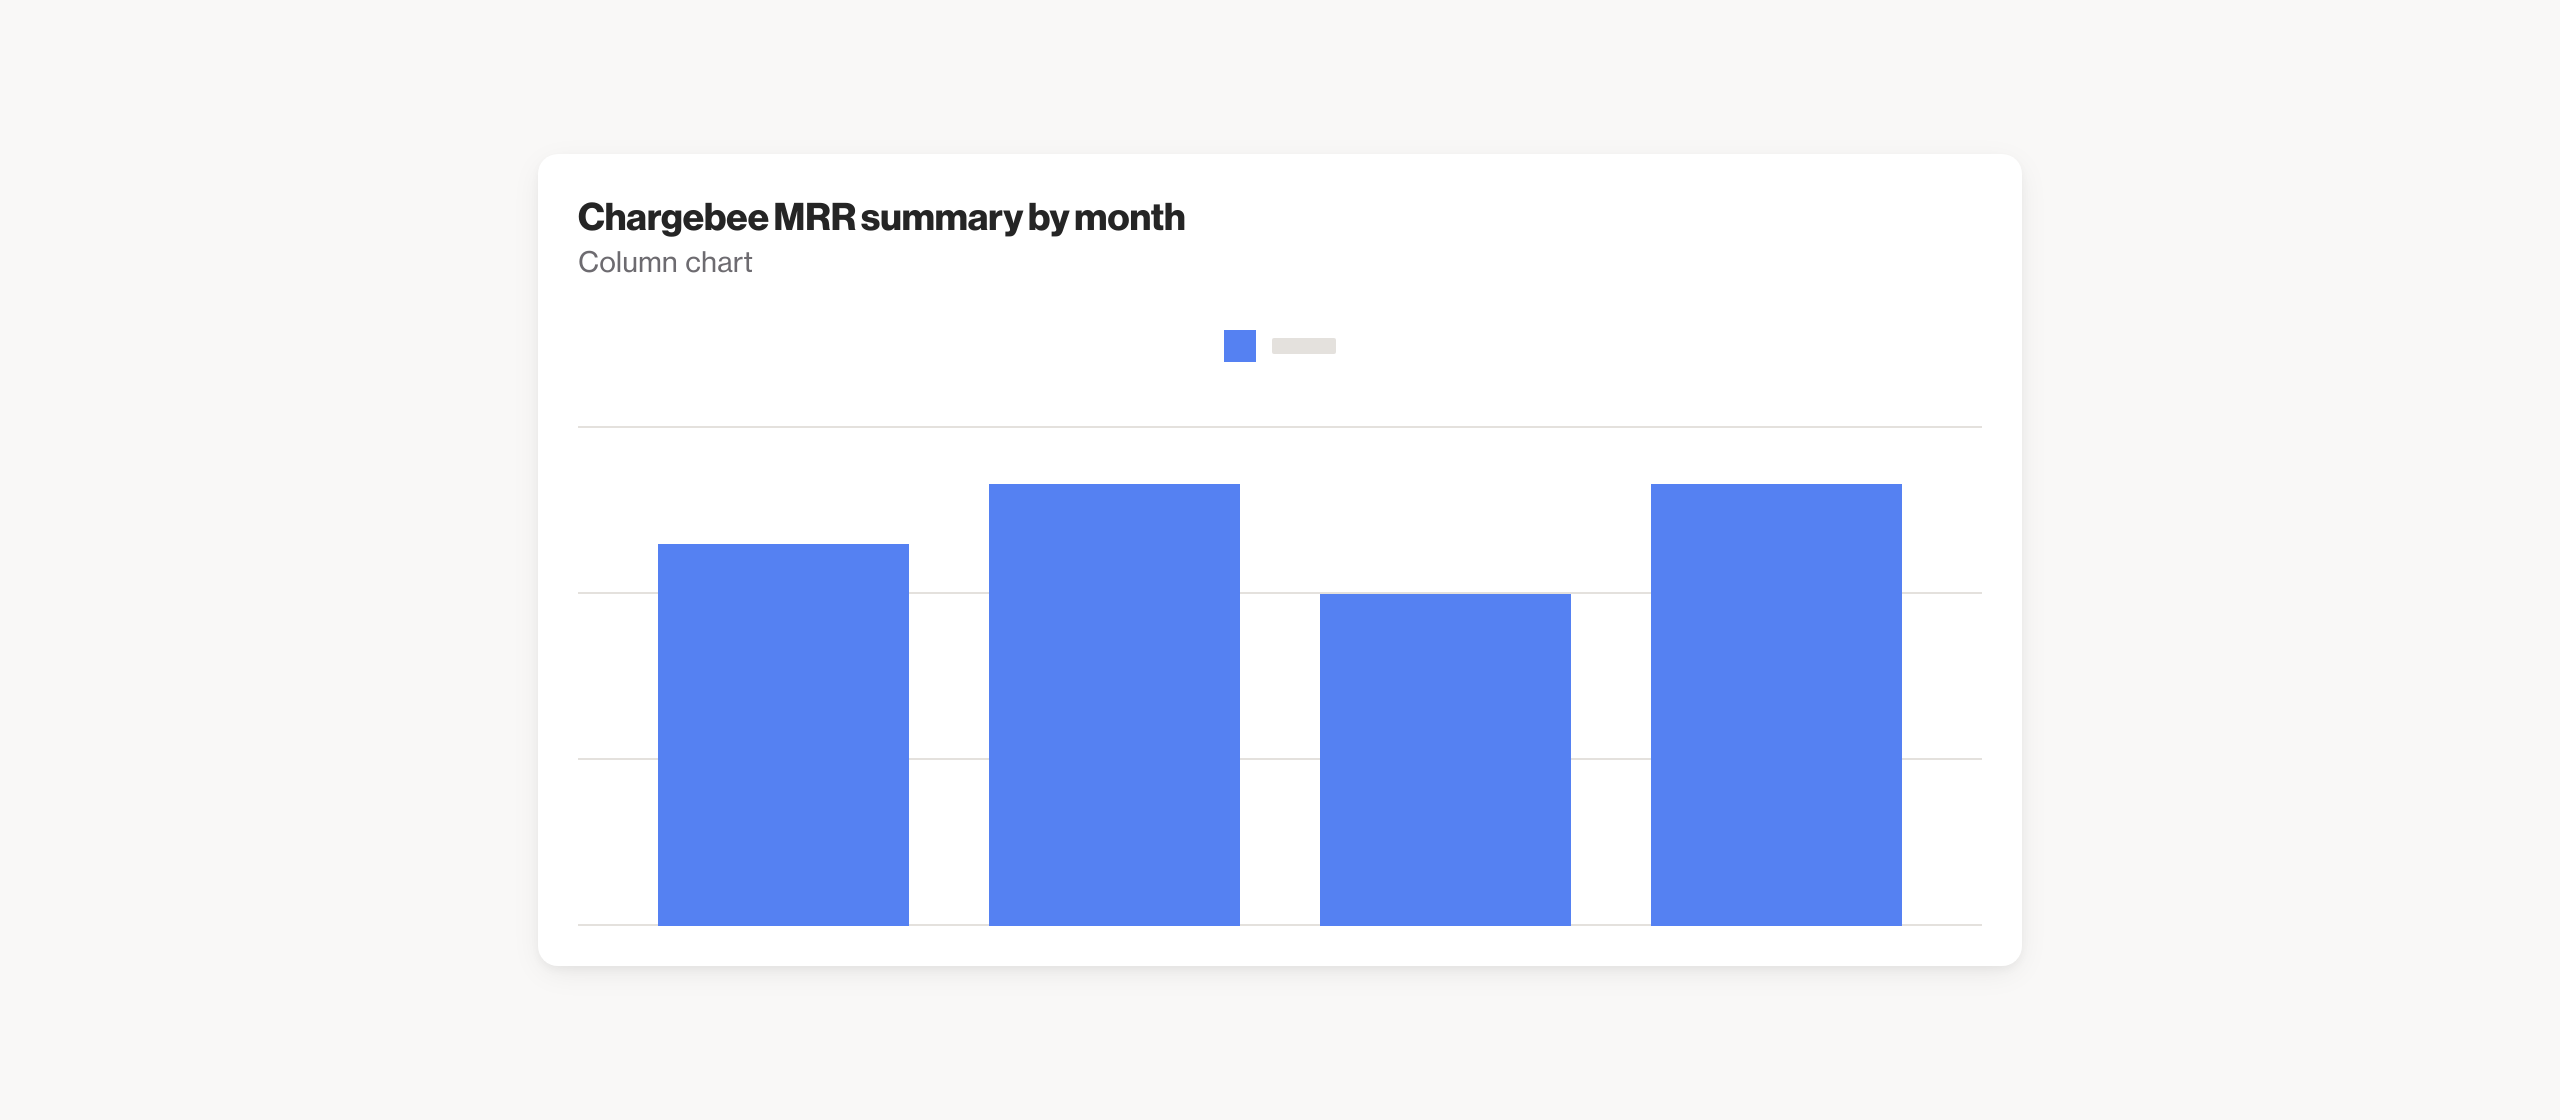 Chargebee MRR summary by month